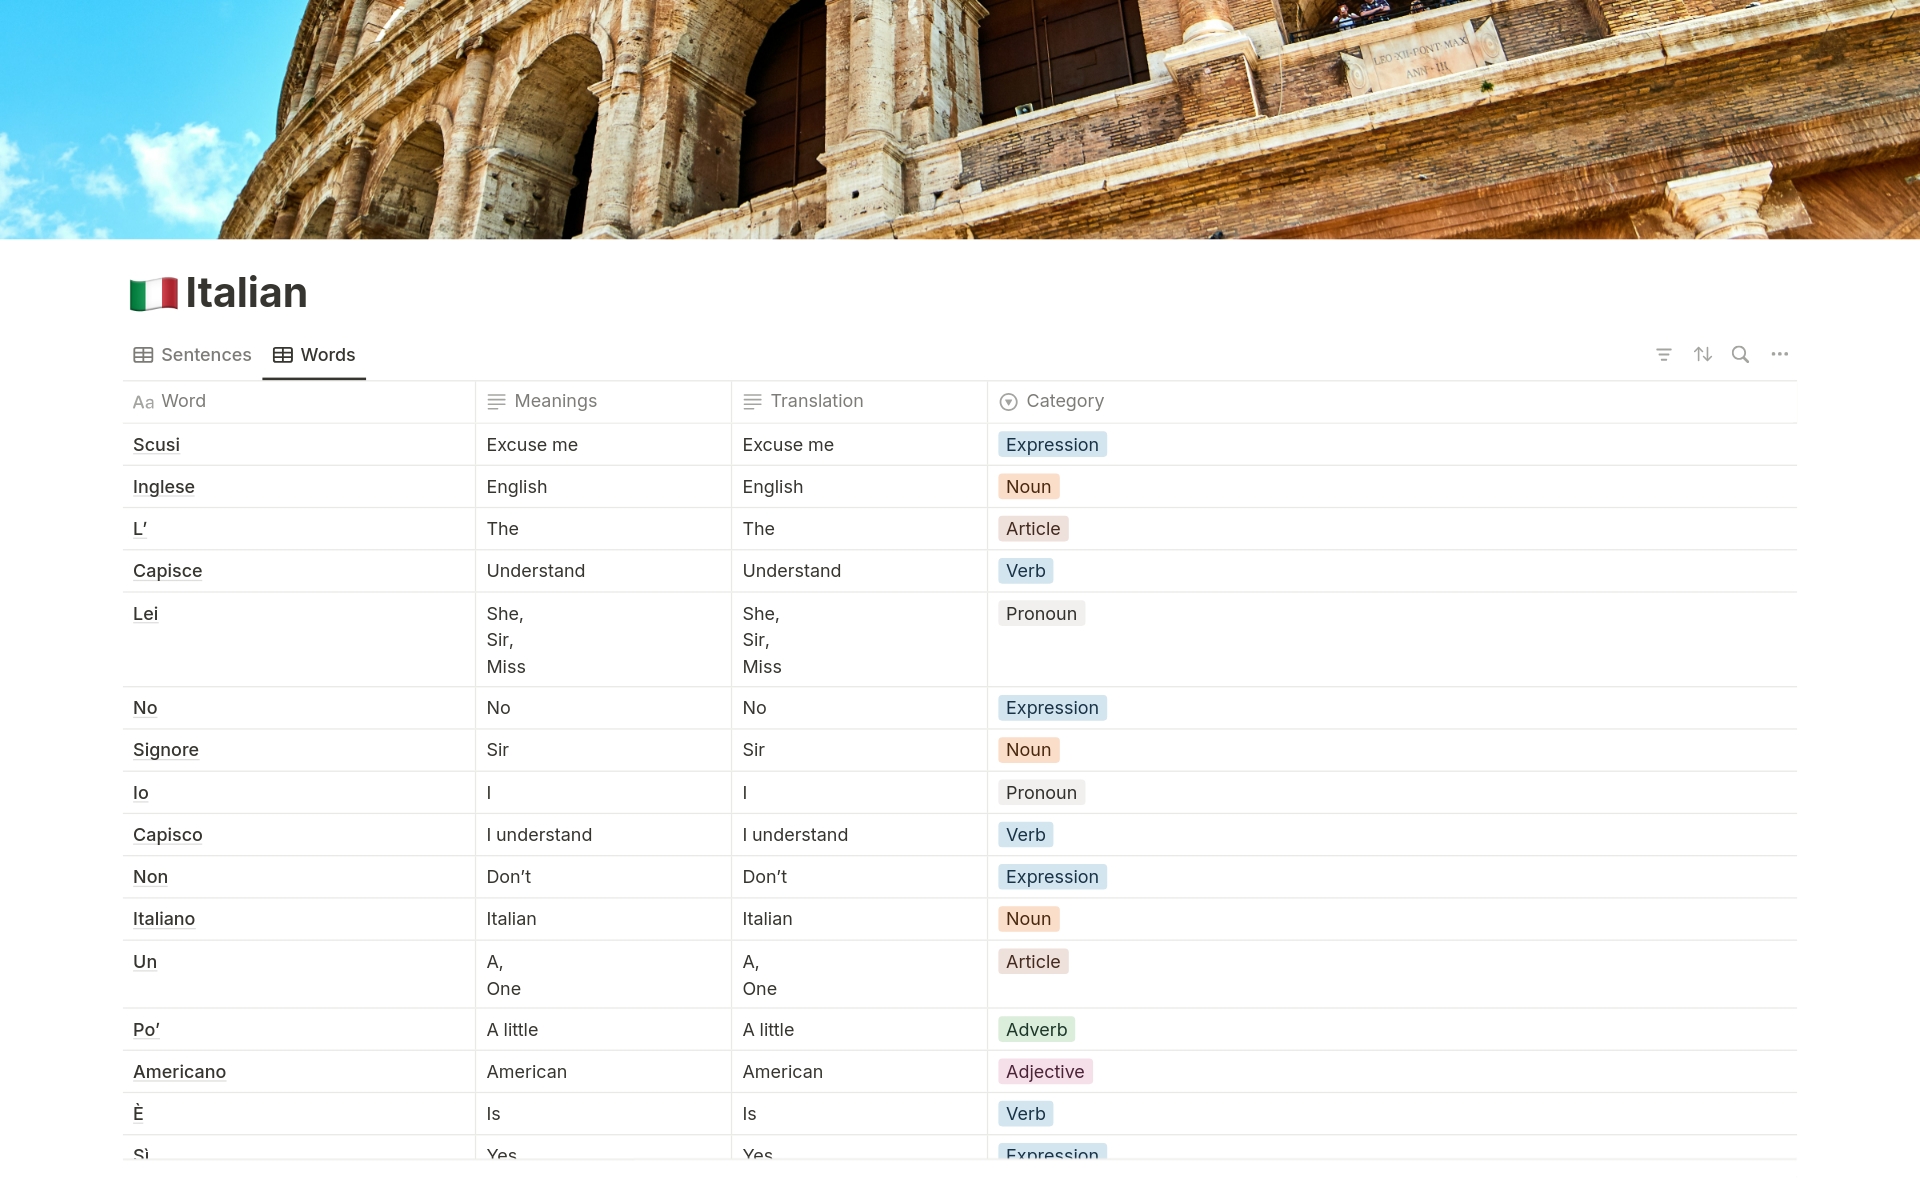 Explore the world of the Italian language in an organized and efficient way with our exclusive Notion template for Italian language learning! This vocabulary system is designed for those who want to master Italian in a systematic and interactive manner.